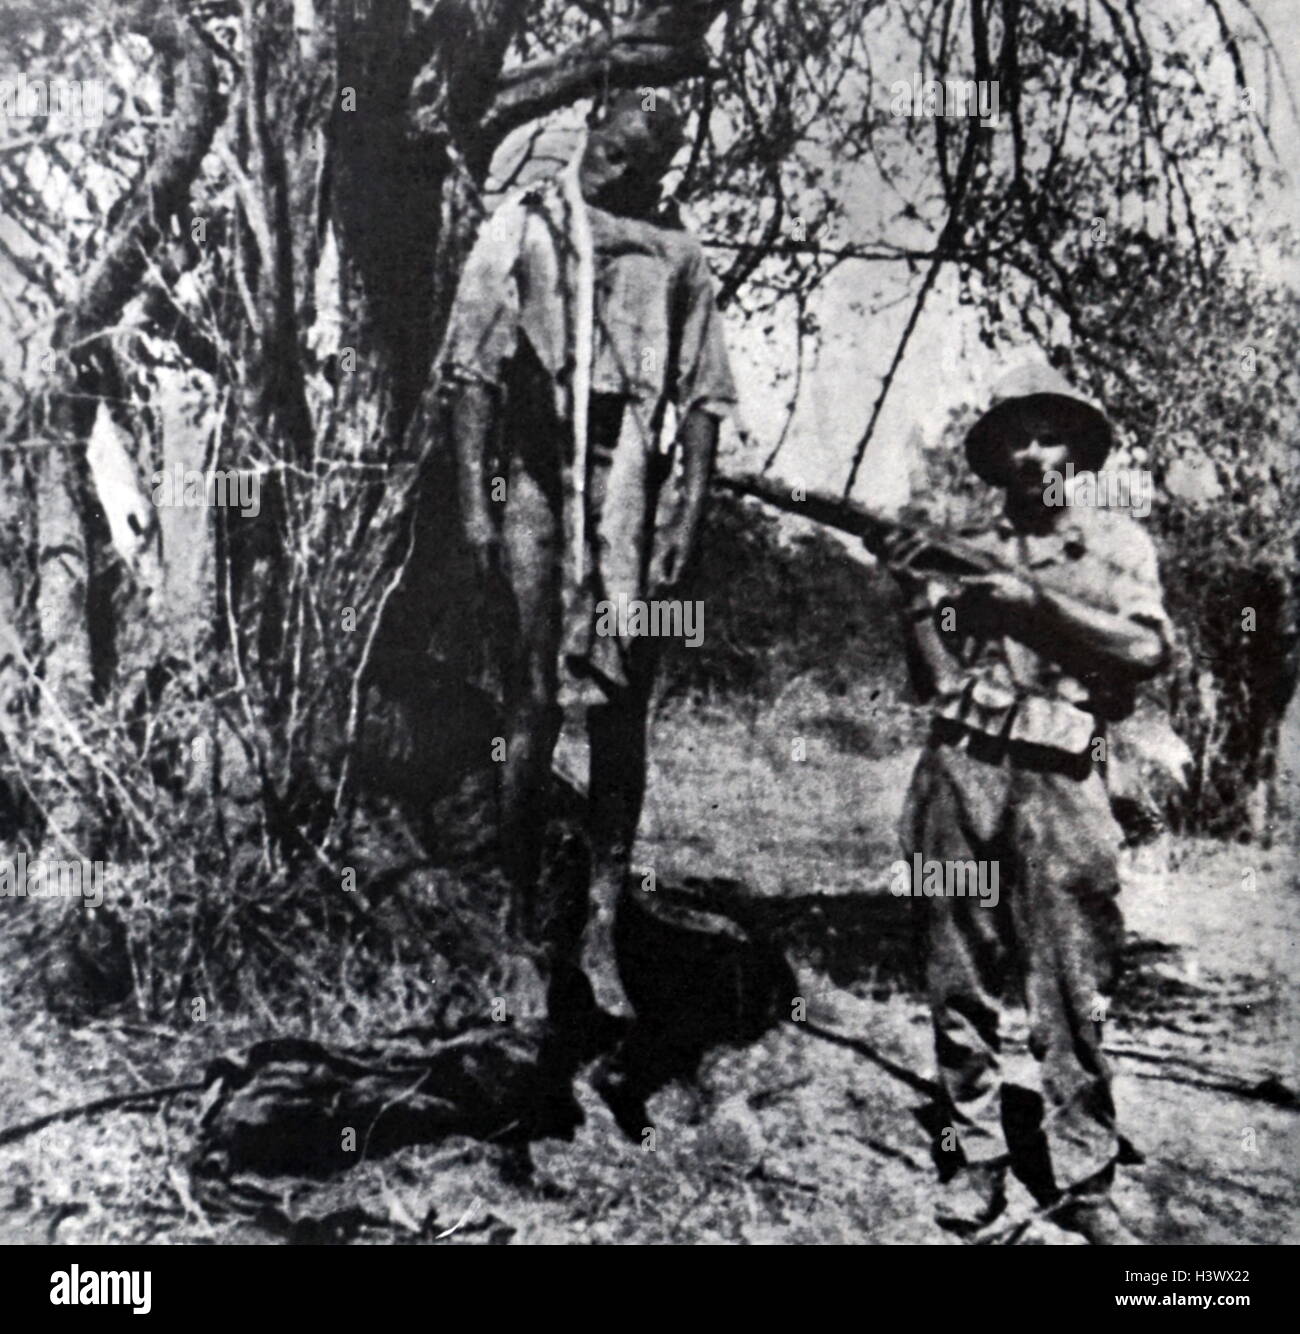 Photograph of an Italian soldier next to a hanging corpse during the fall of Abyssinia. Dated 20th Century Stock Photo